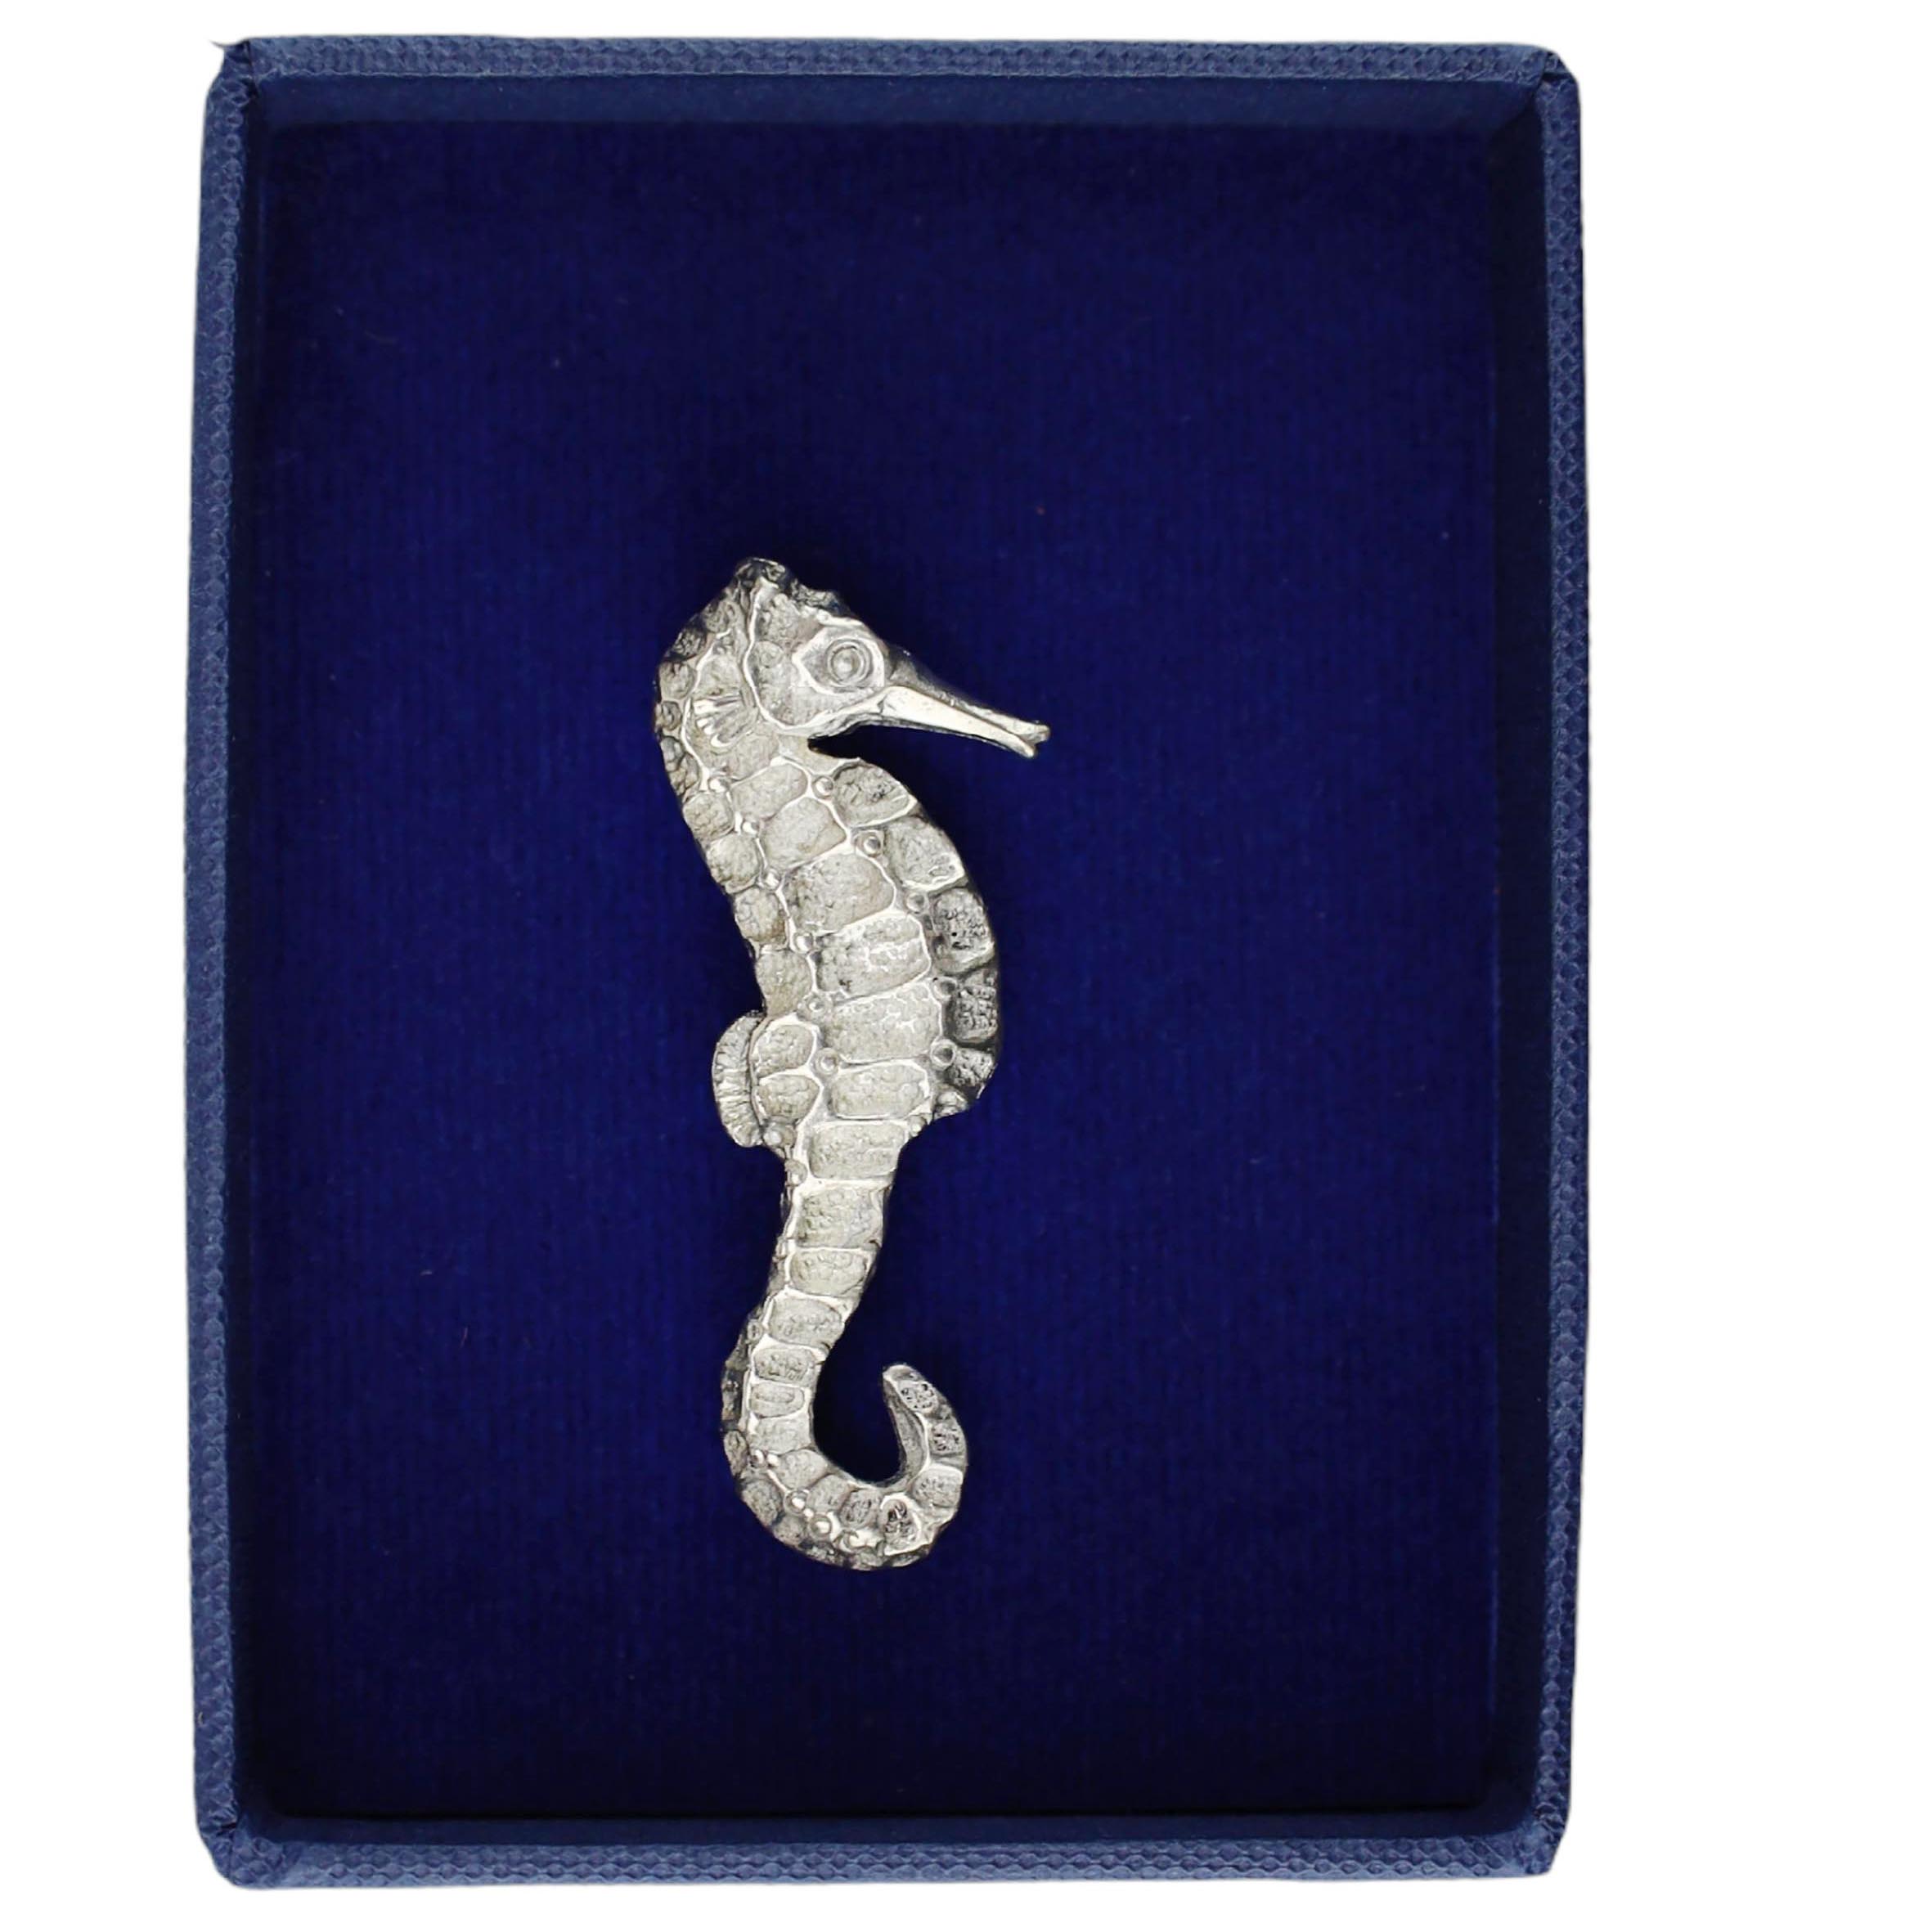 Pewter Crab Seahorse Pin shown in the Navy box that it comes in